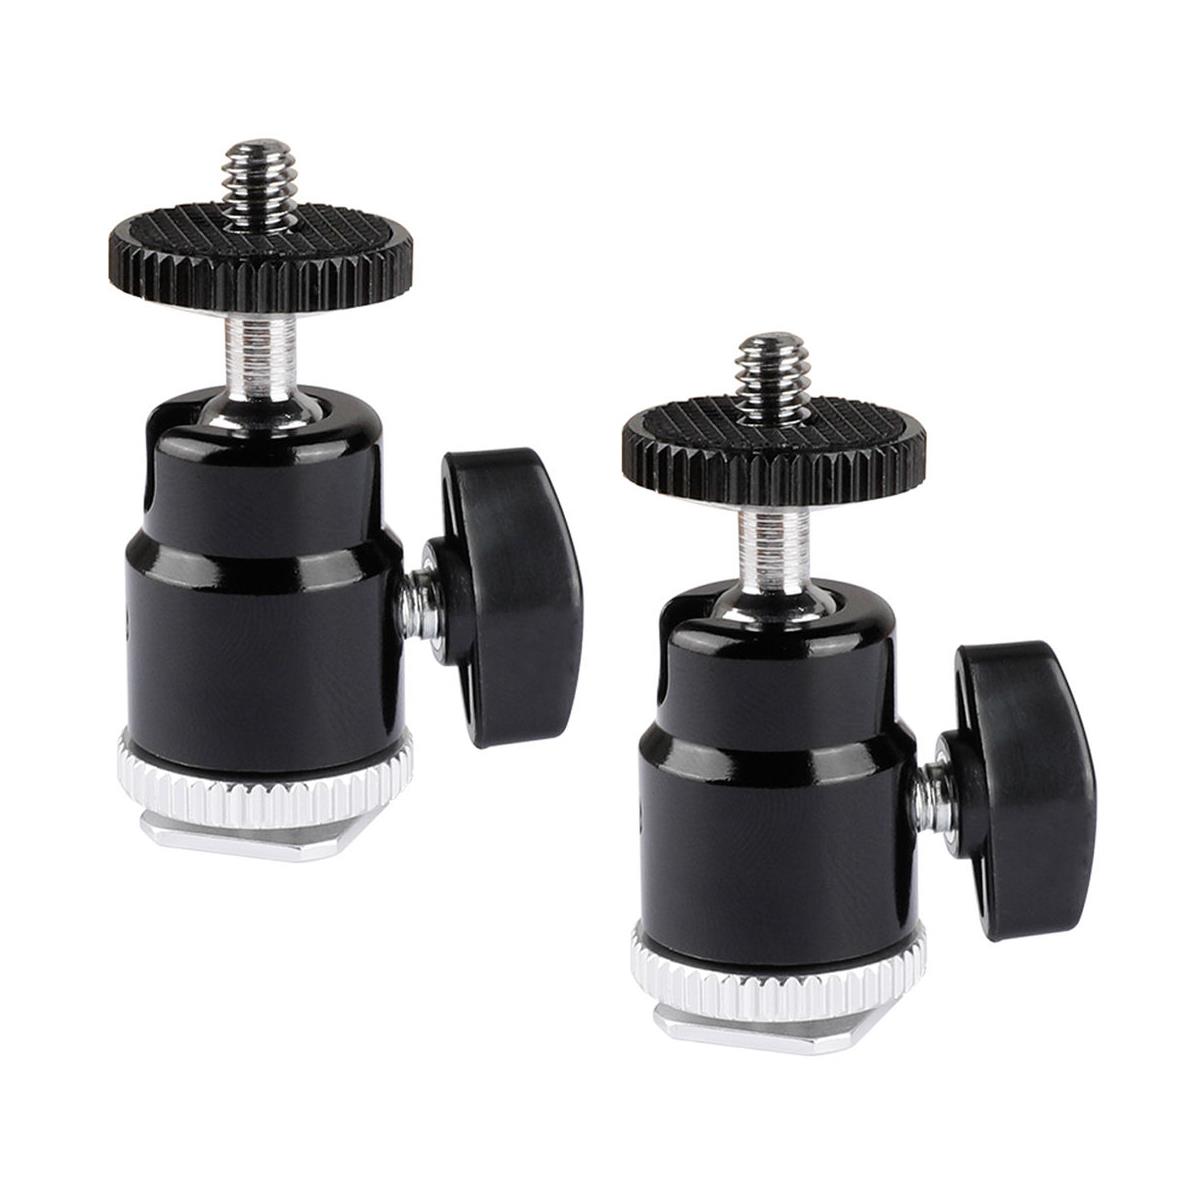 

CAMVATE 1/4"-20 Mini Ball Head with Shoe Mount Adapter, 2-Pack